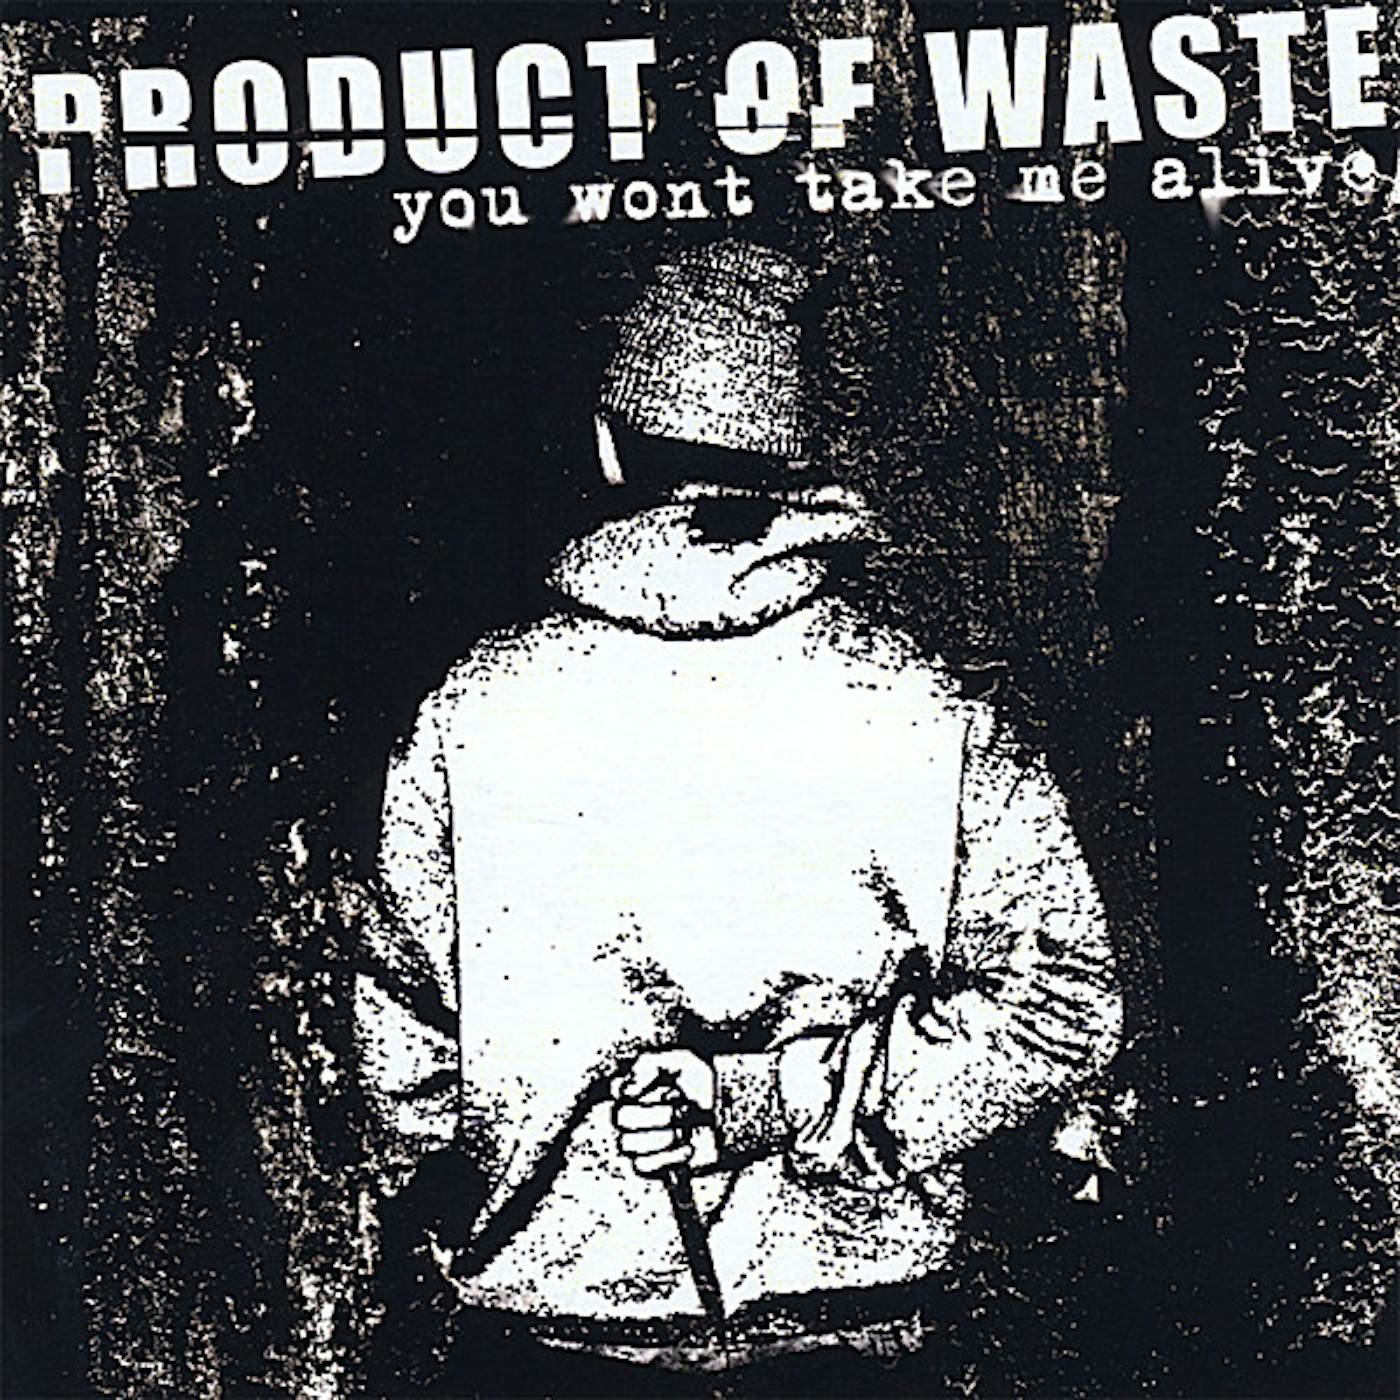 Product of Waste YOU WON'T TAKE ME ALIVE CD